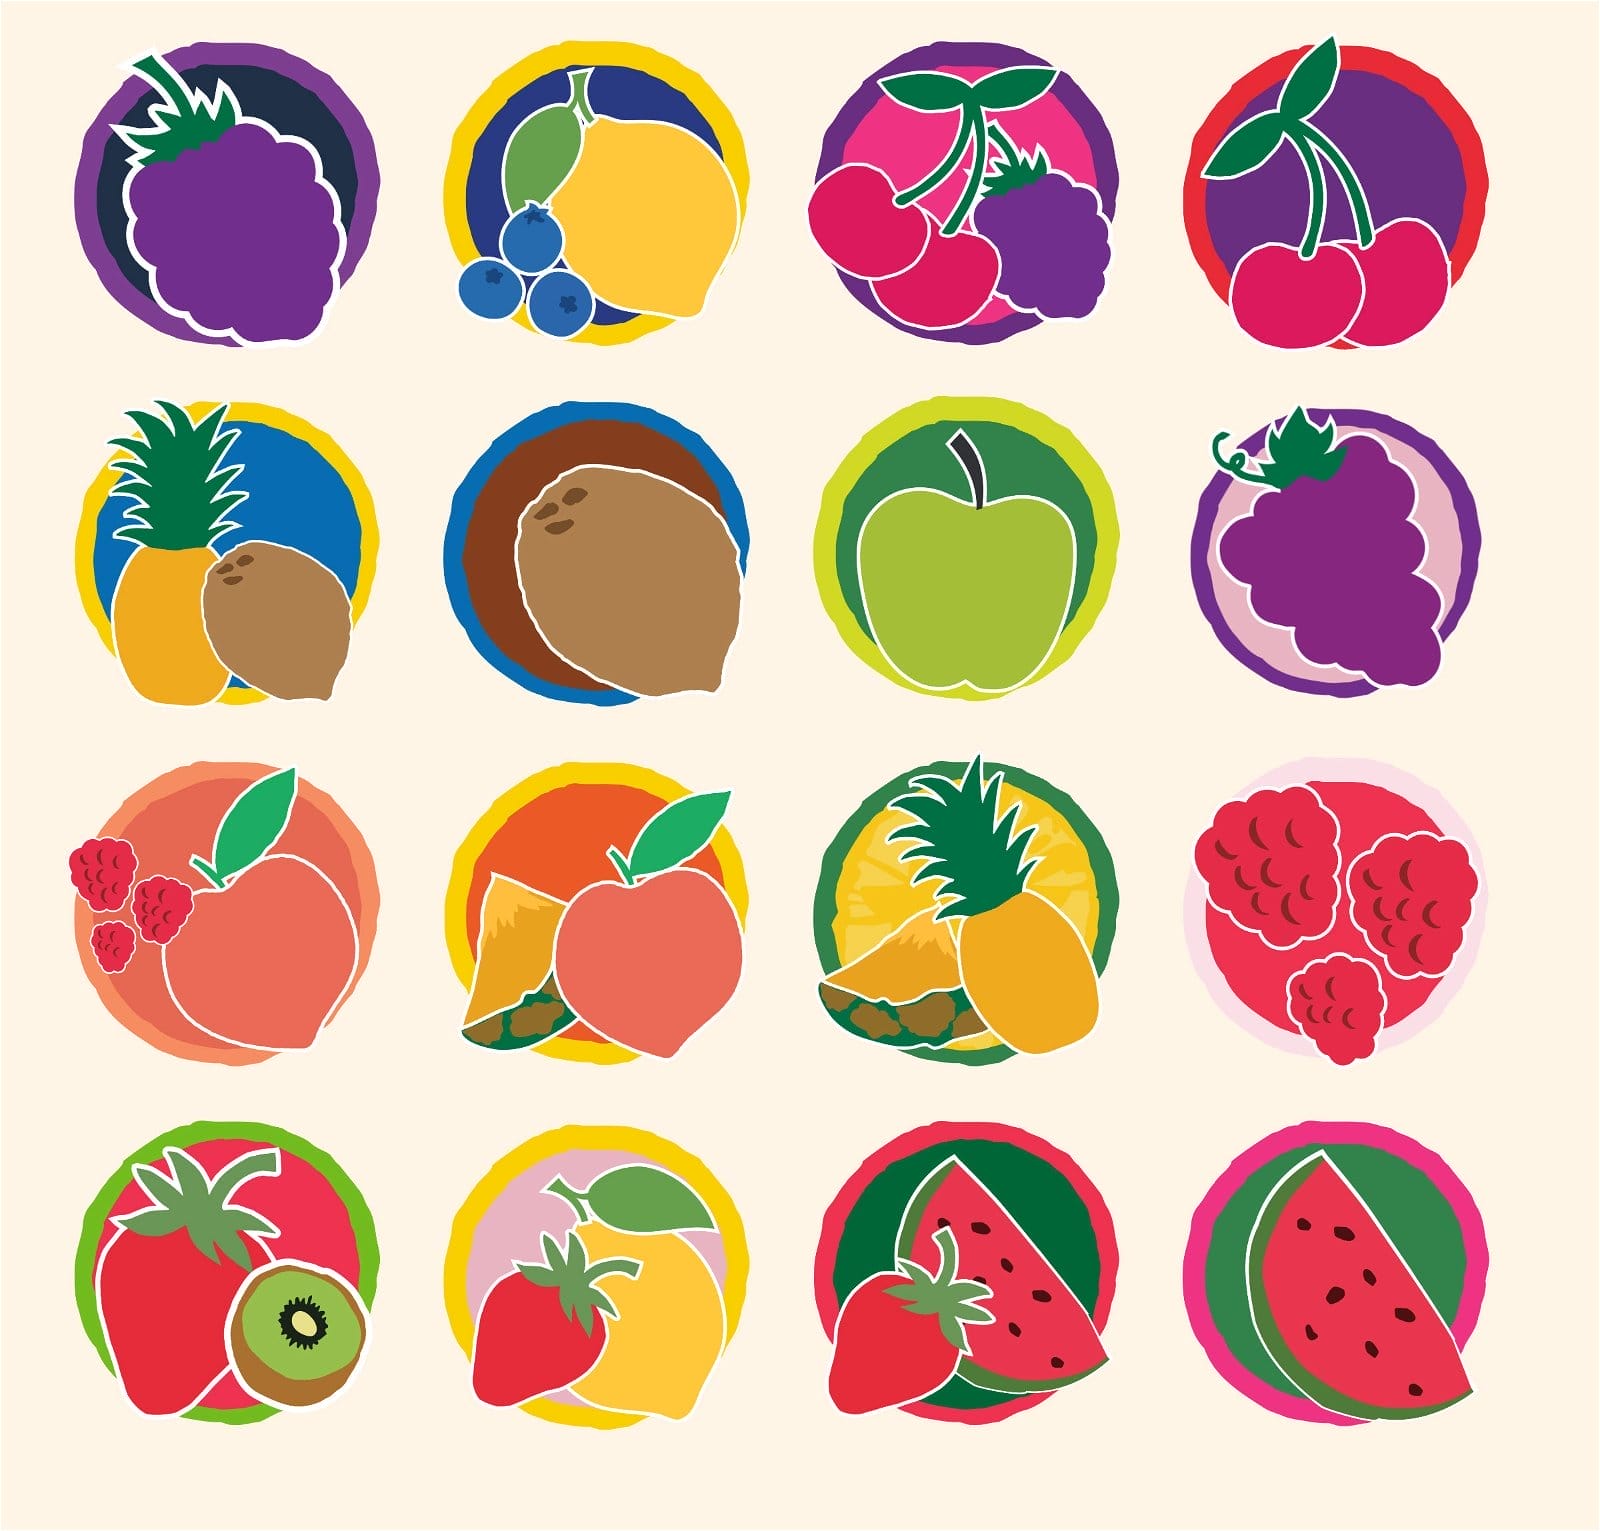 16 flavors of Hint illustrated with fruit